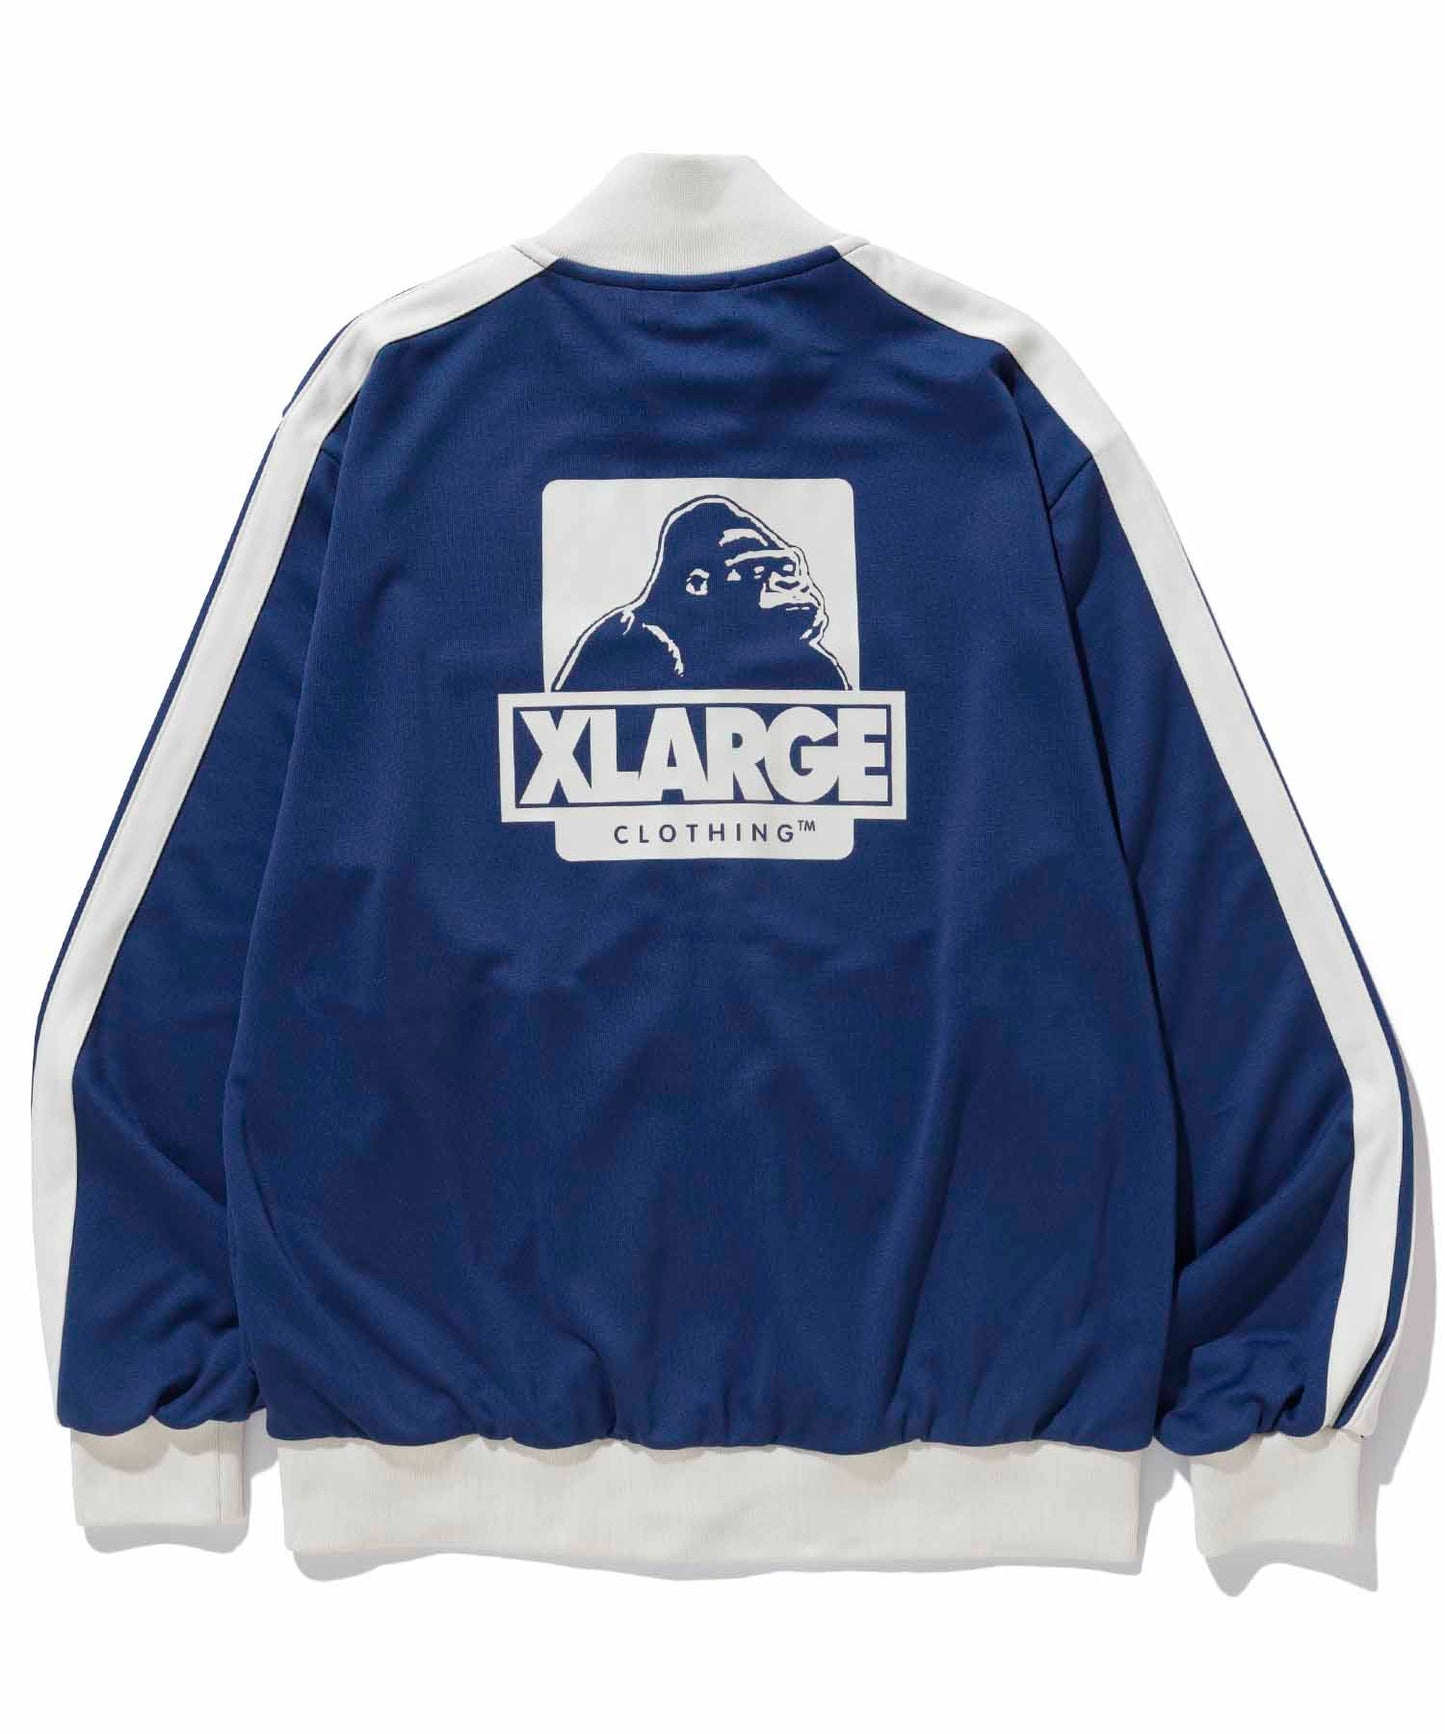 Official Logo Gear Jackets, Track Jackets, Pullovers, Coats